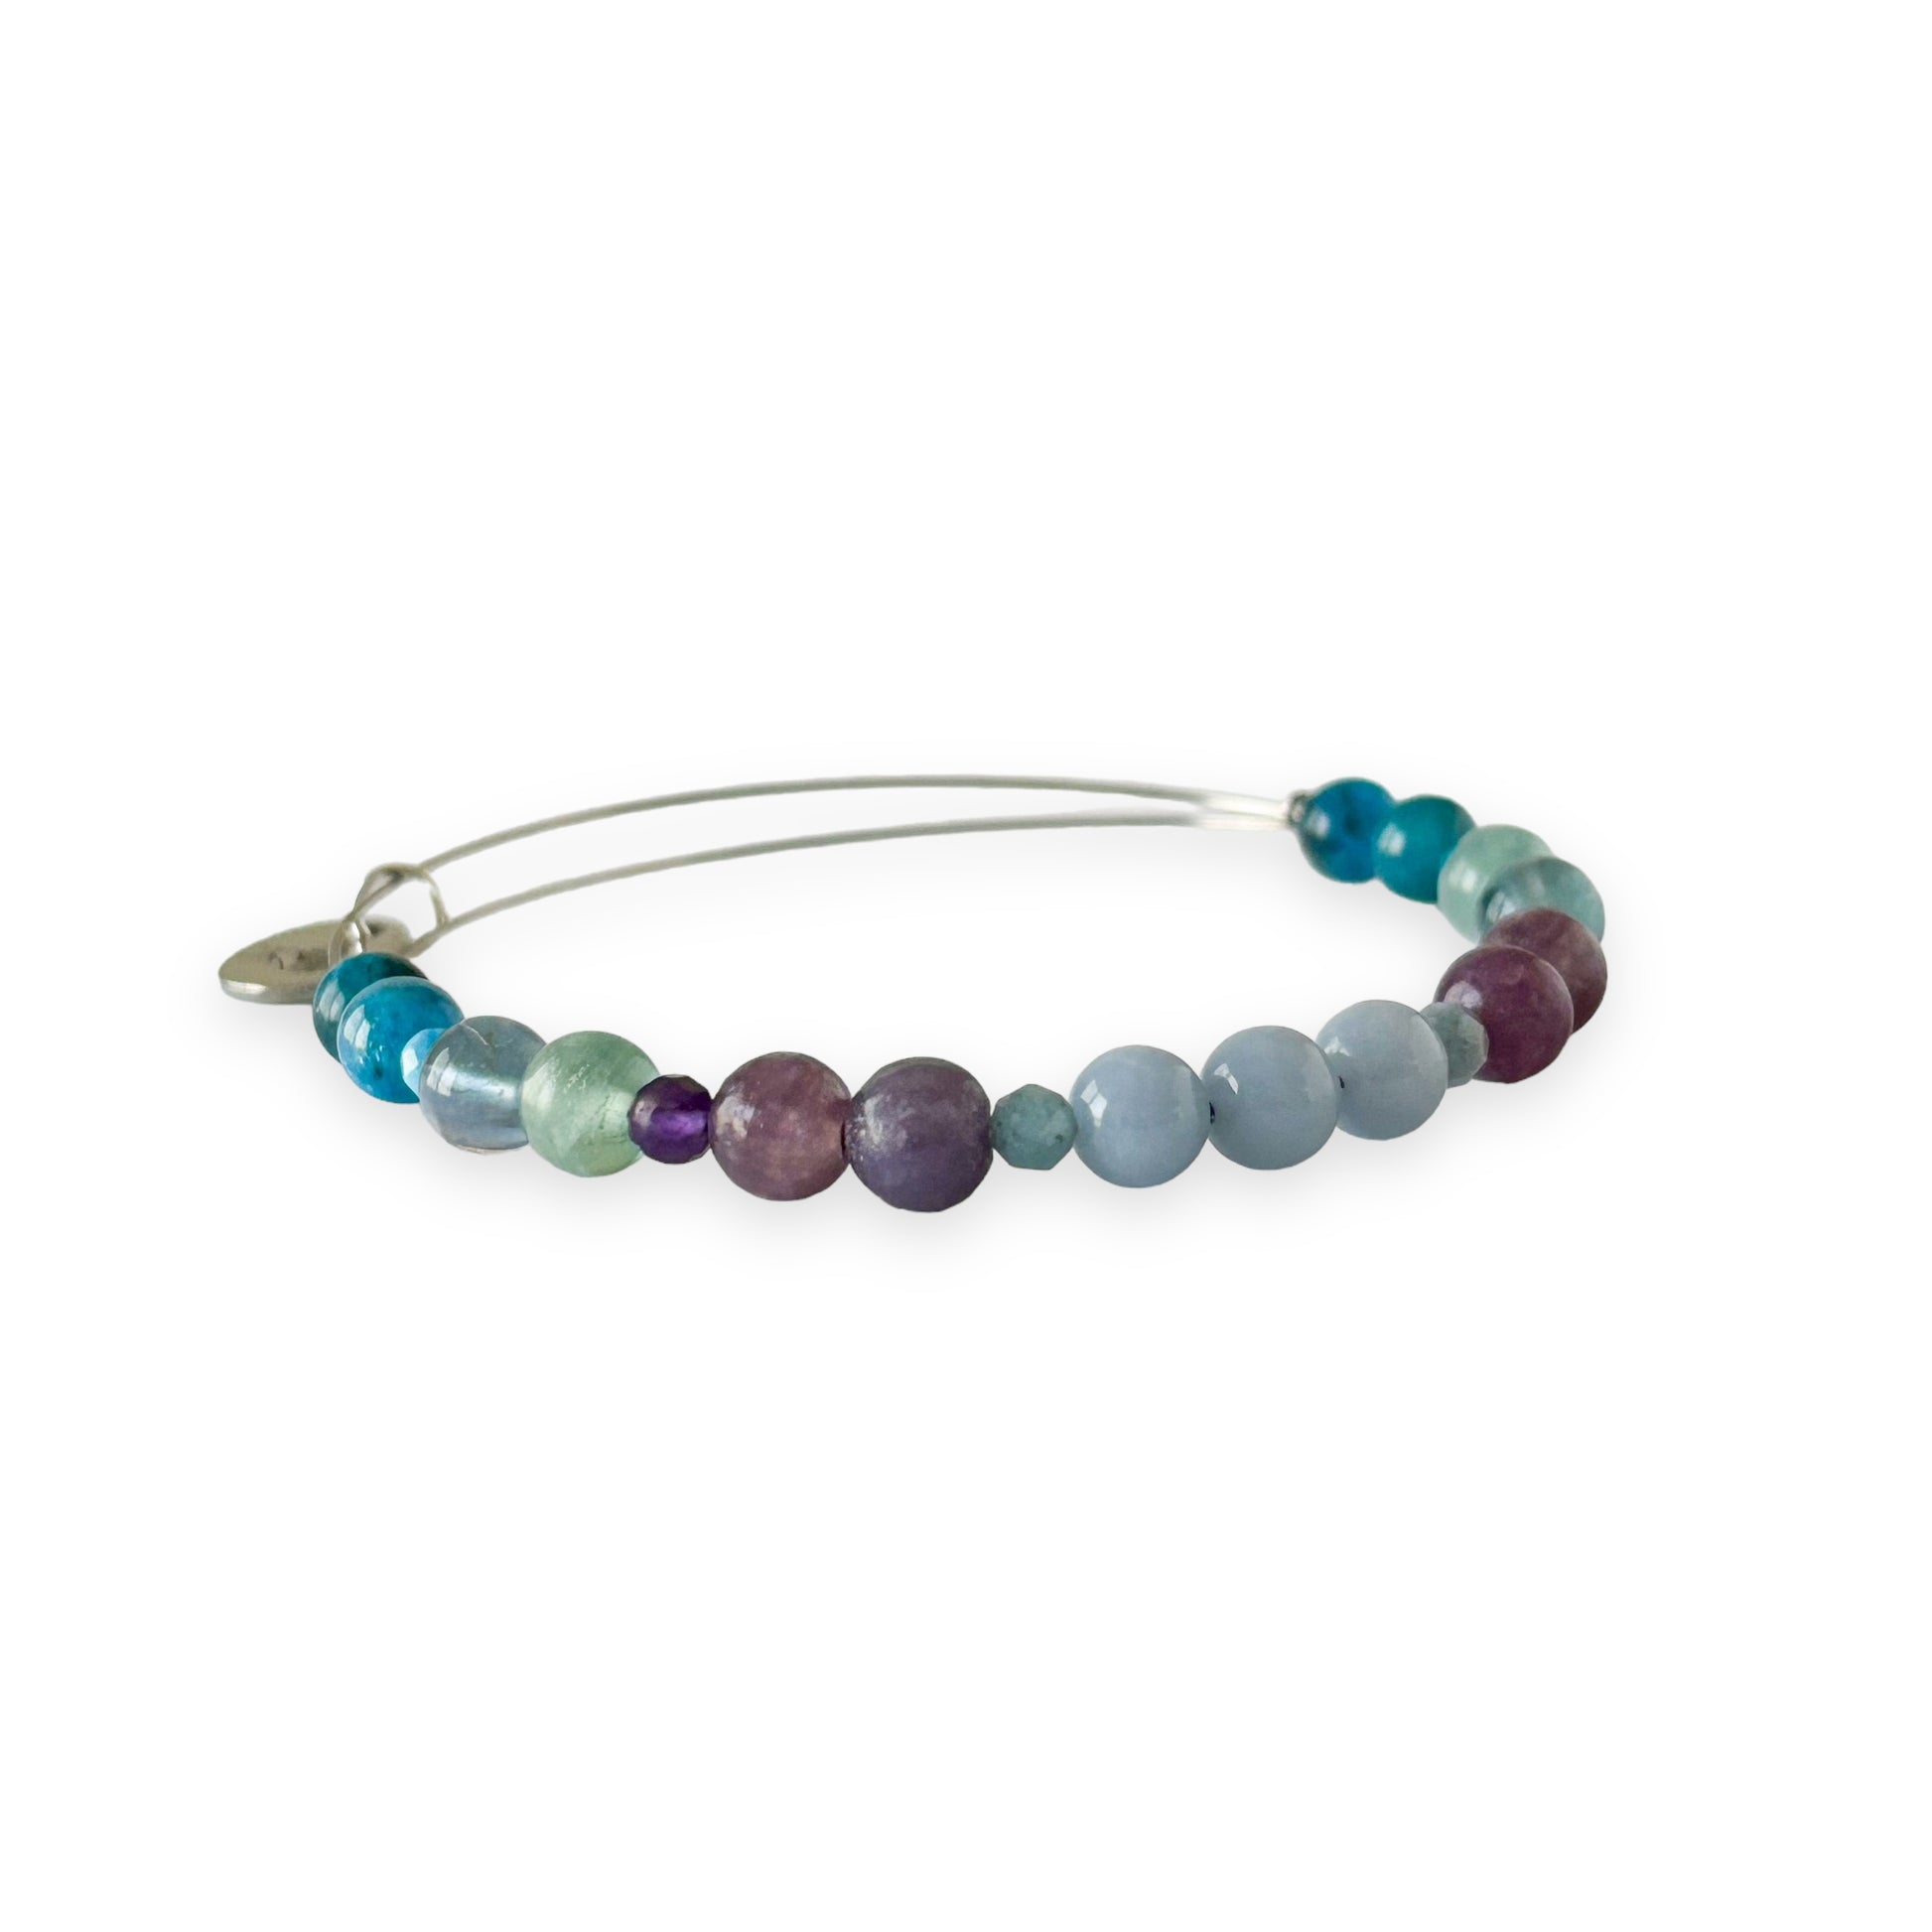 Handcrafted crystal bangle for inner peace